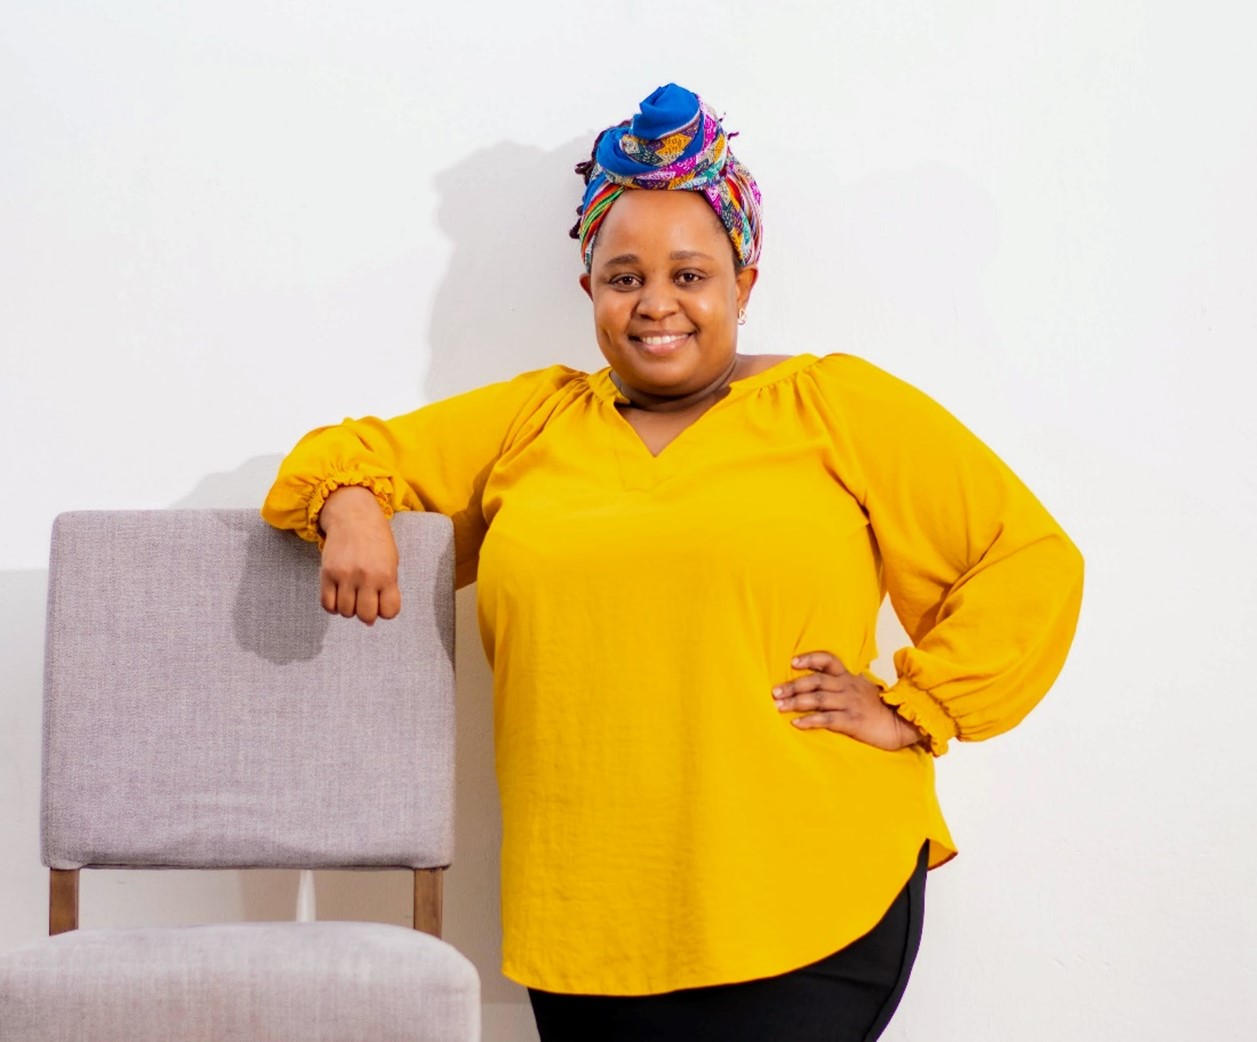 A confident woman in a yellow blouse and colorful headwrap stands with one hand resting on a gray chair against a white background.